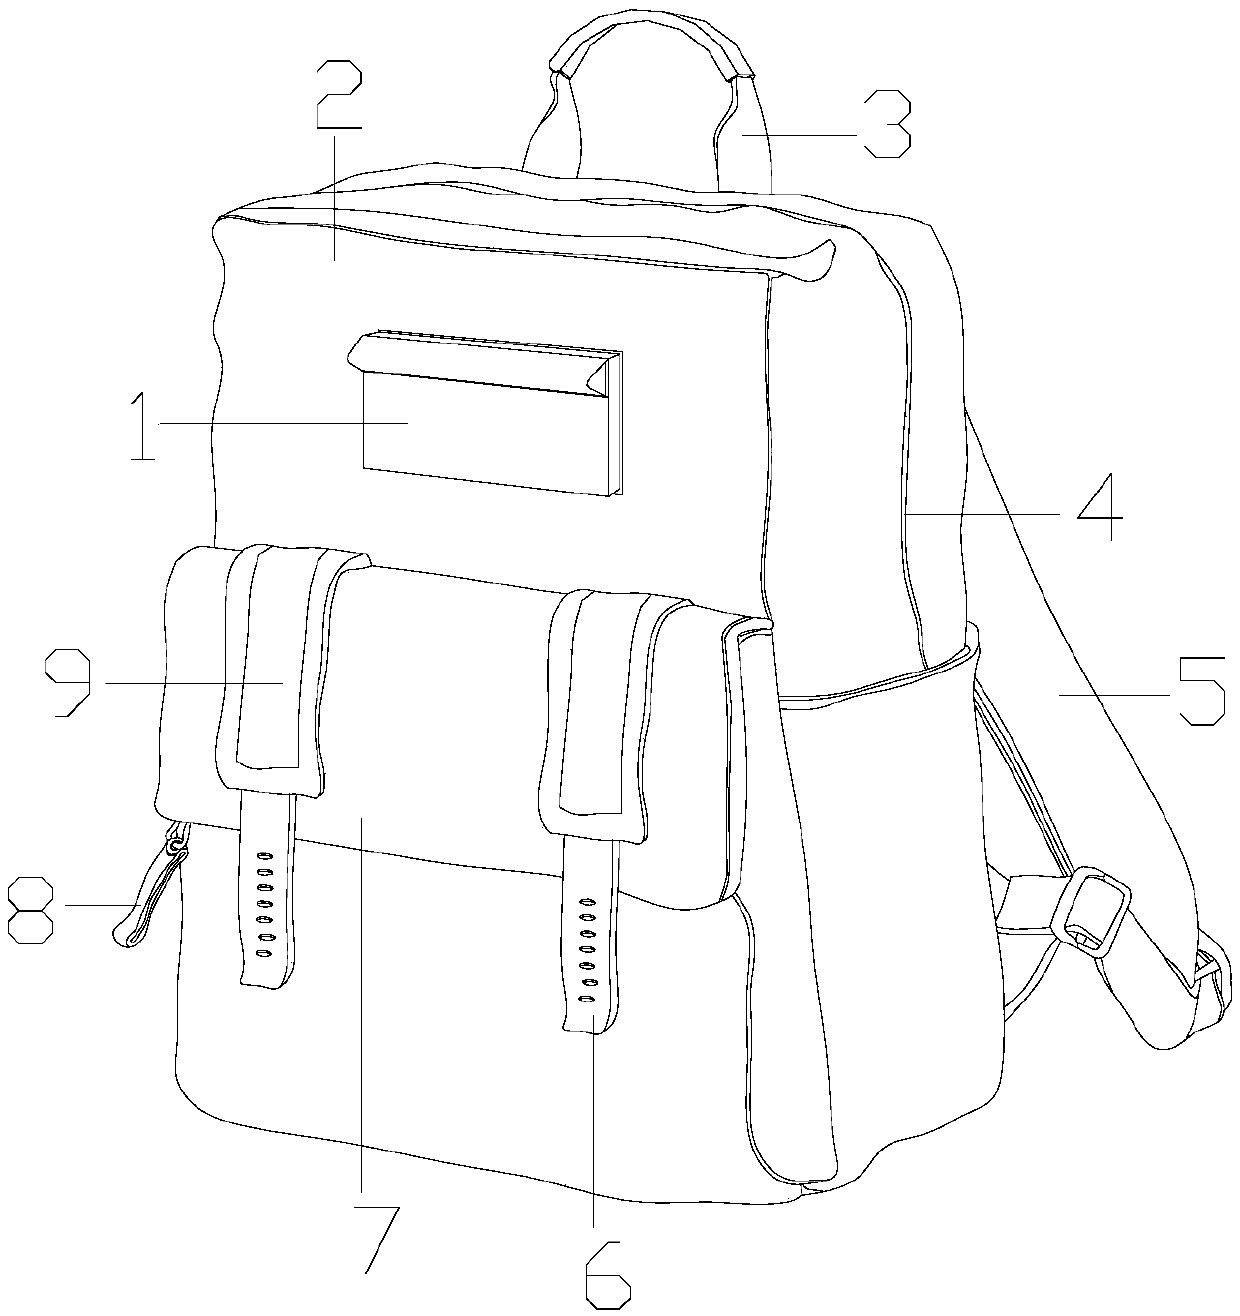 Schoolbag with clamping groove realizing convenient card swiping and external force protection